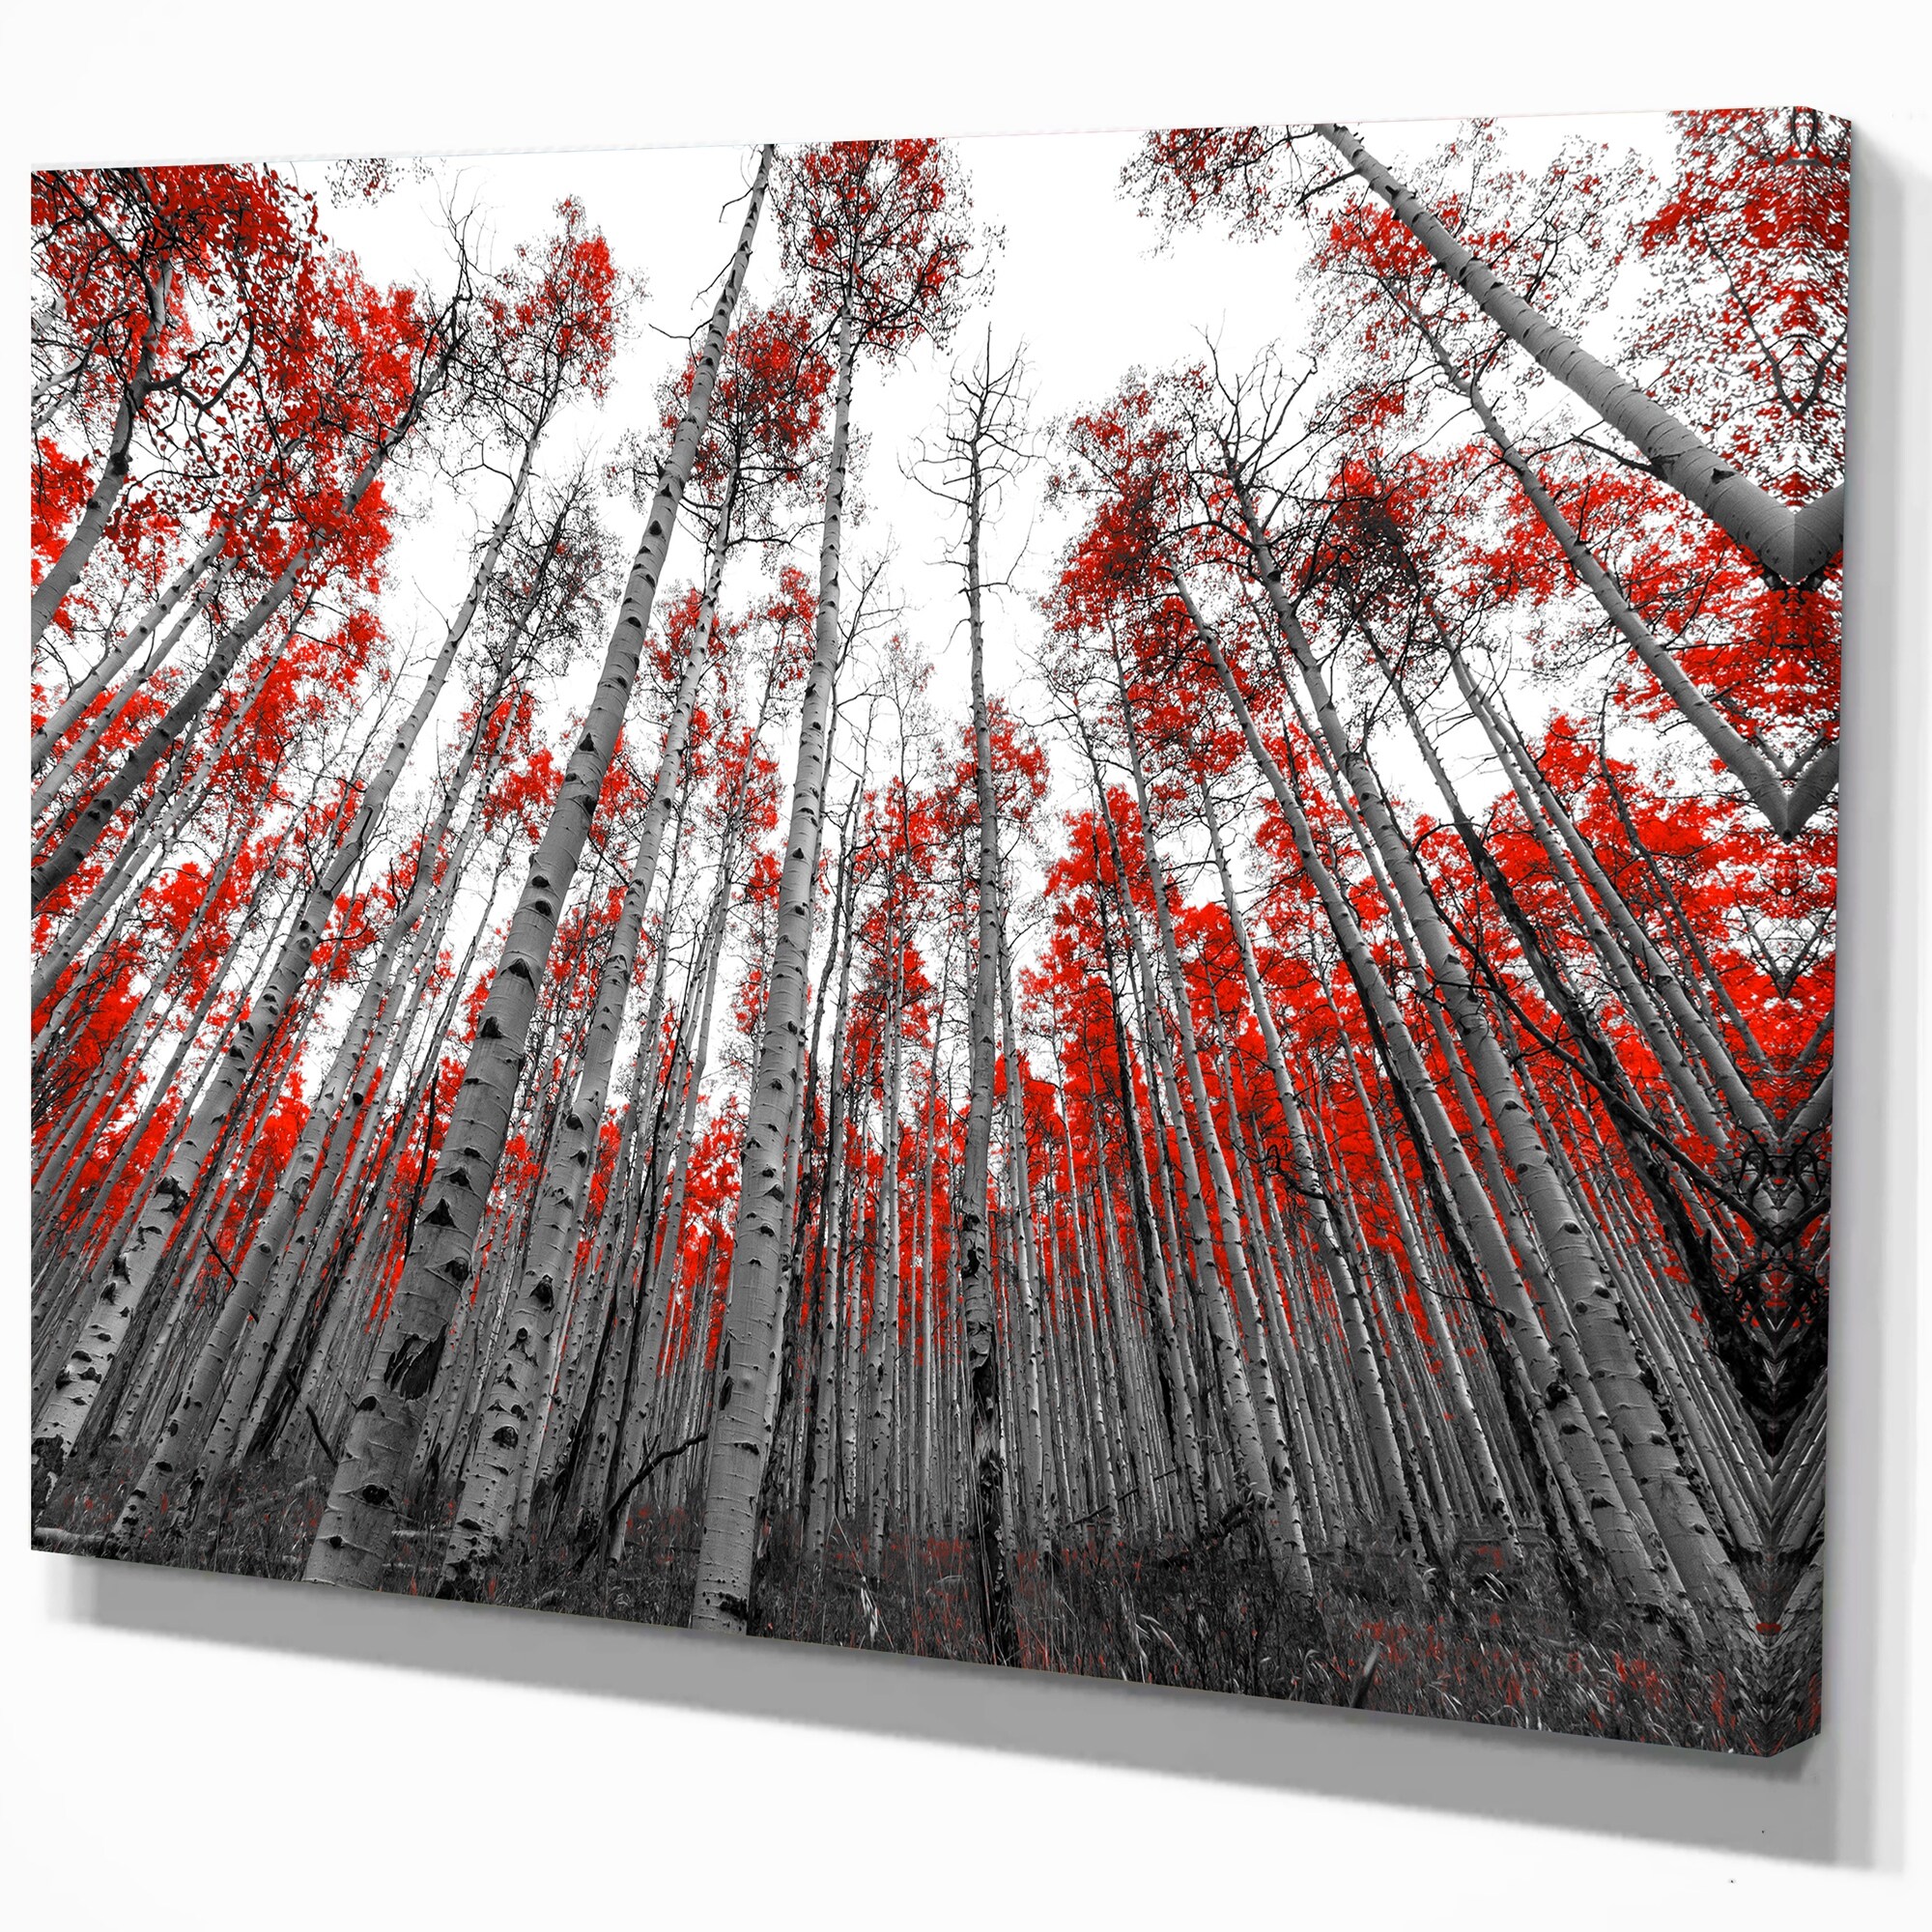 https://ak1.ostkcdn.com/images/products/is/images/direct/5defa8ad080bfce91ac0a5f575bb2bb53c40df7e/Designart-%27Red-Leaf-Trees-in-Tall-Forest%27-Floral-Landscapes-Photographic-on-wrapped-Canvas.jpg